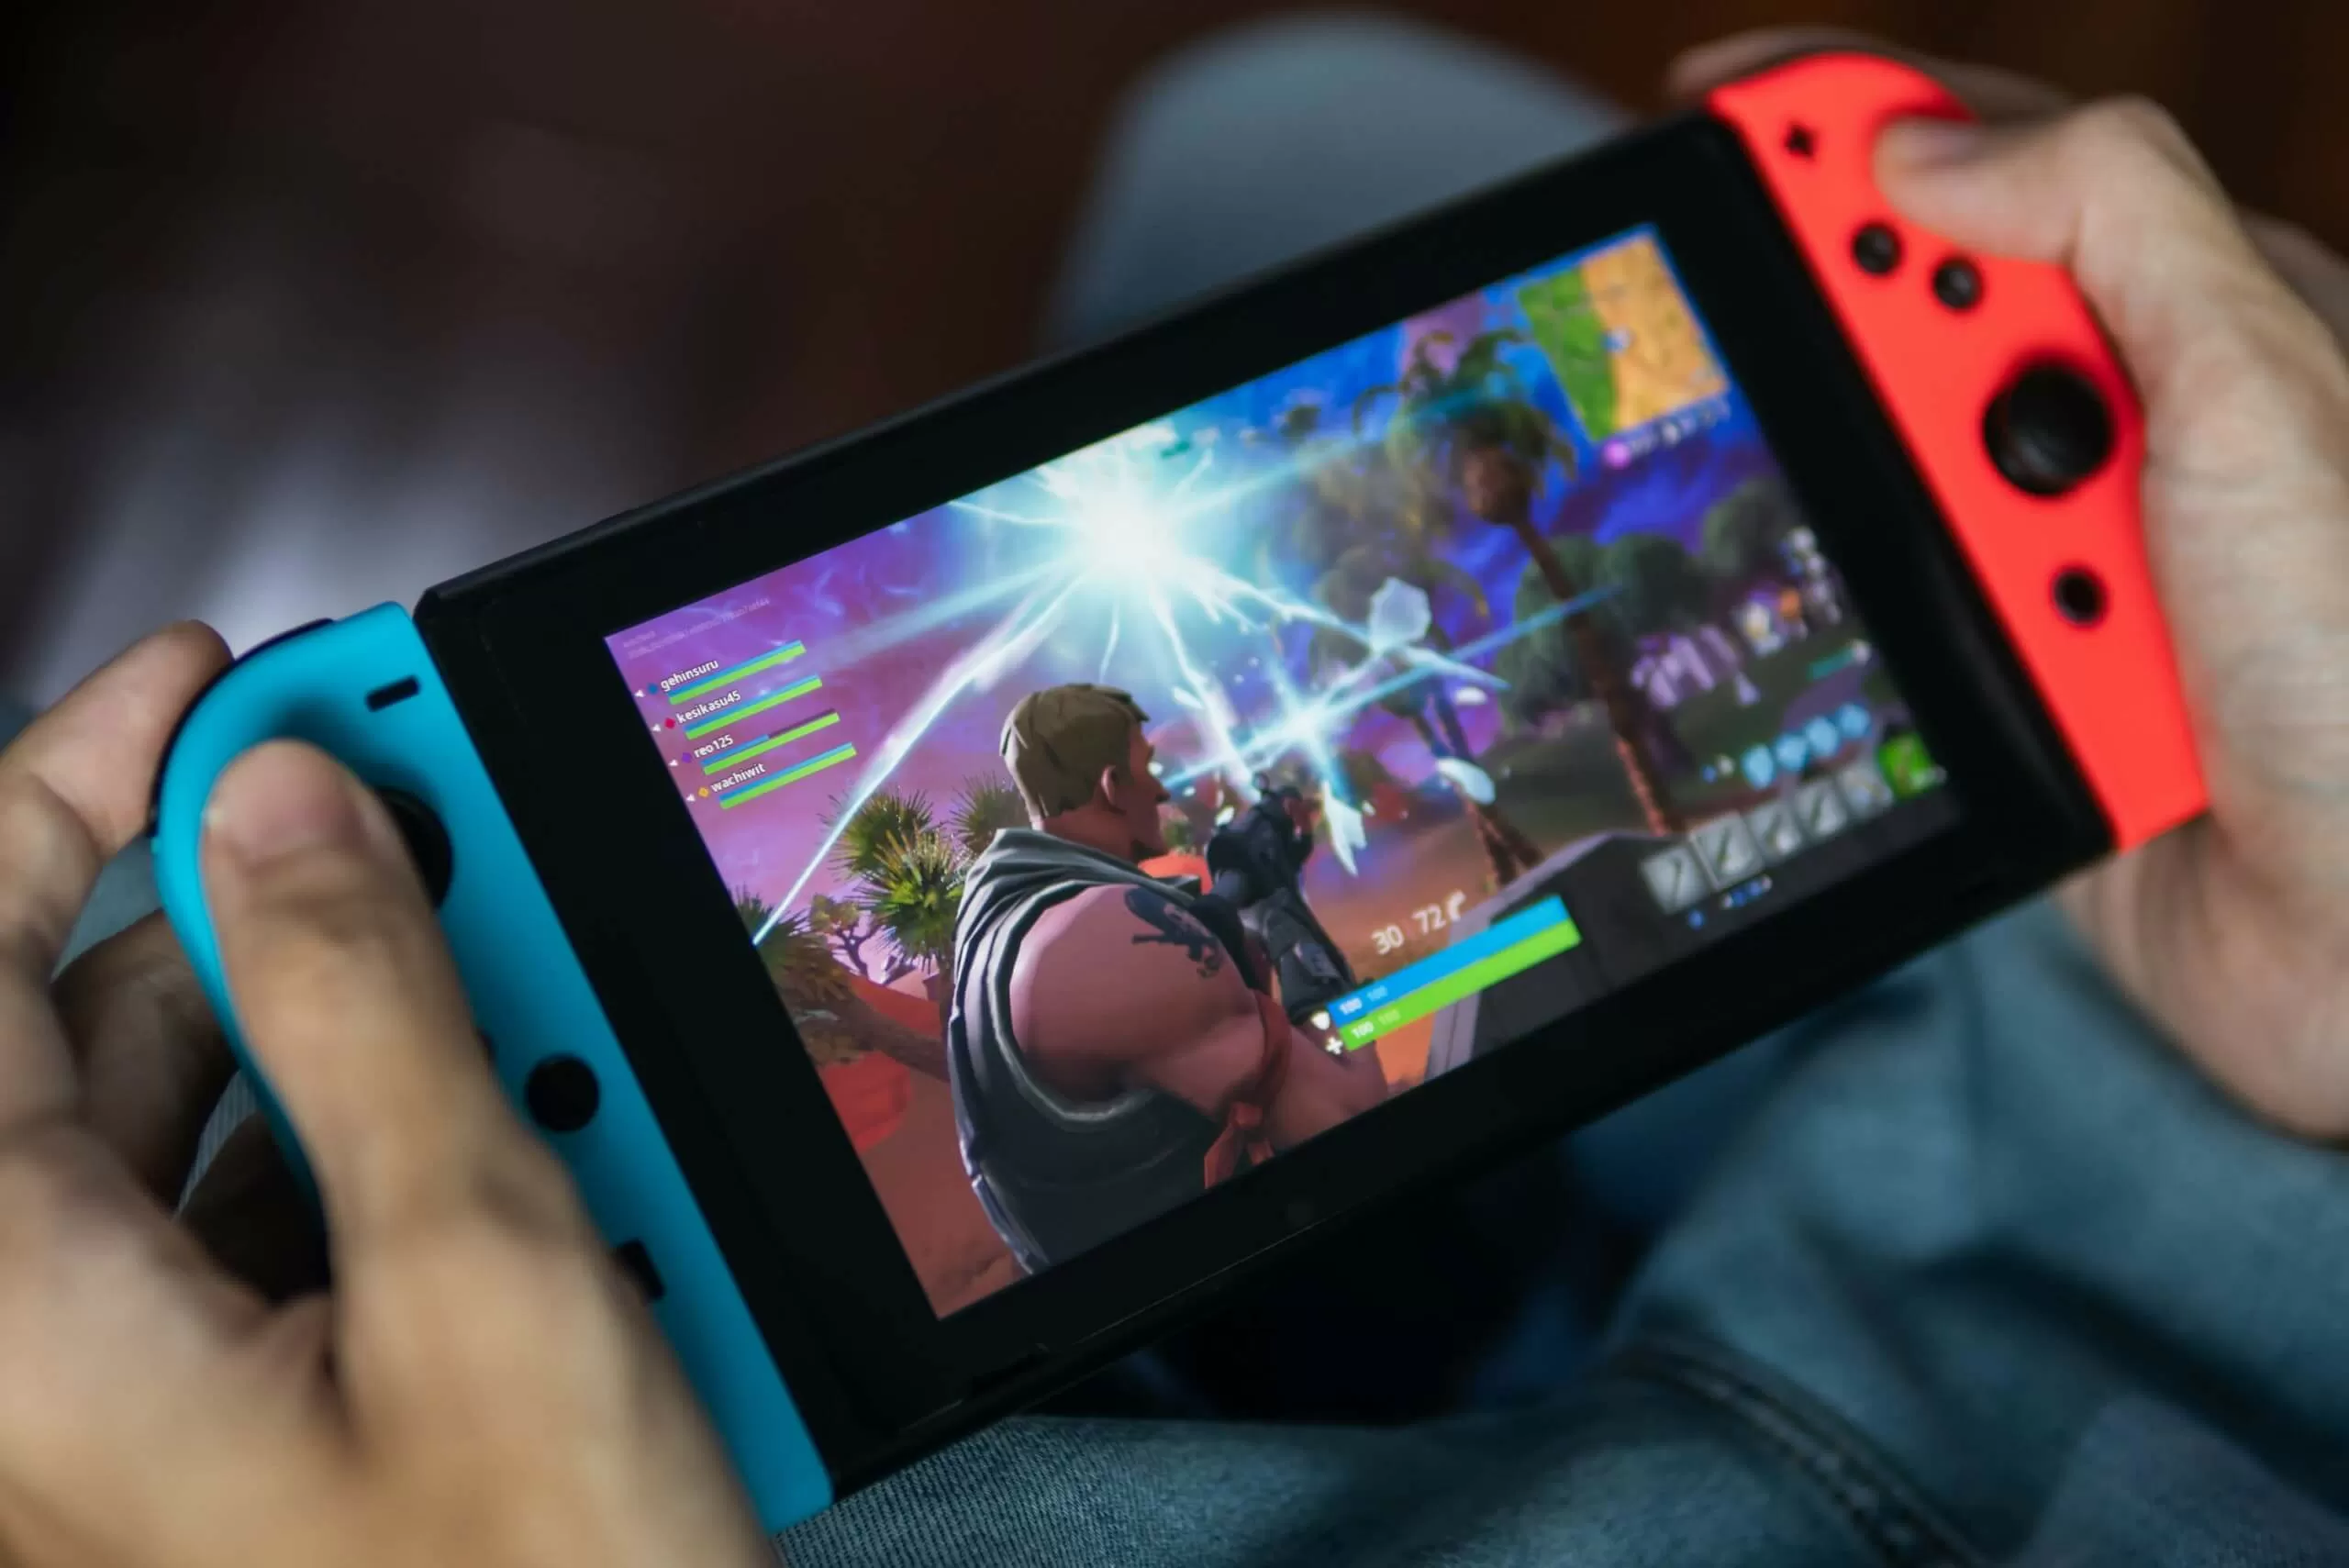 The Switch continues to make Nintendo look good with new sales records